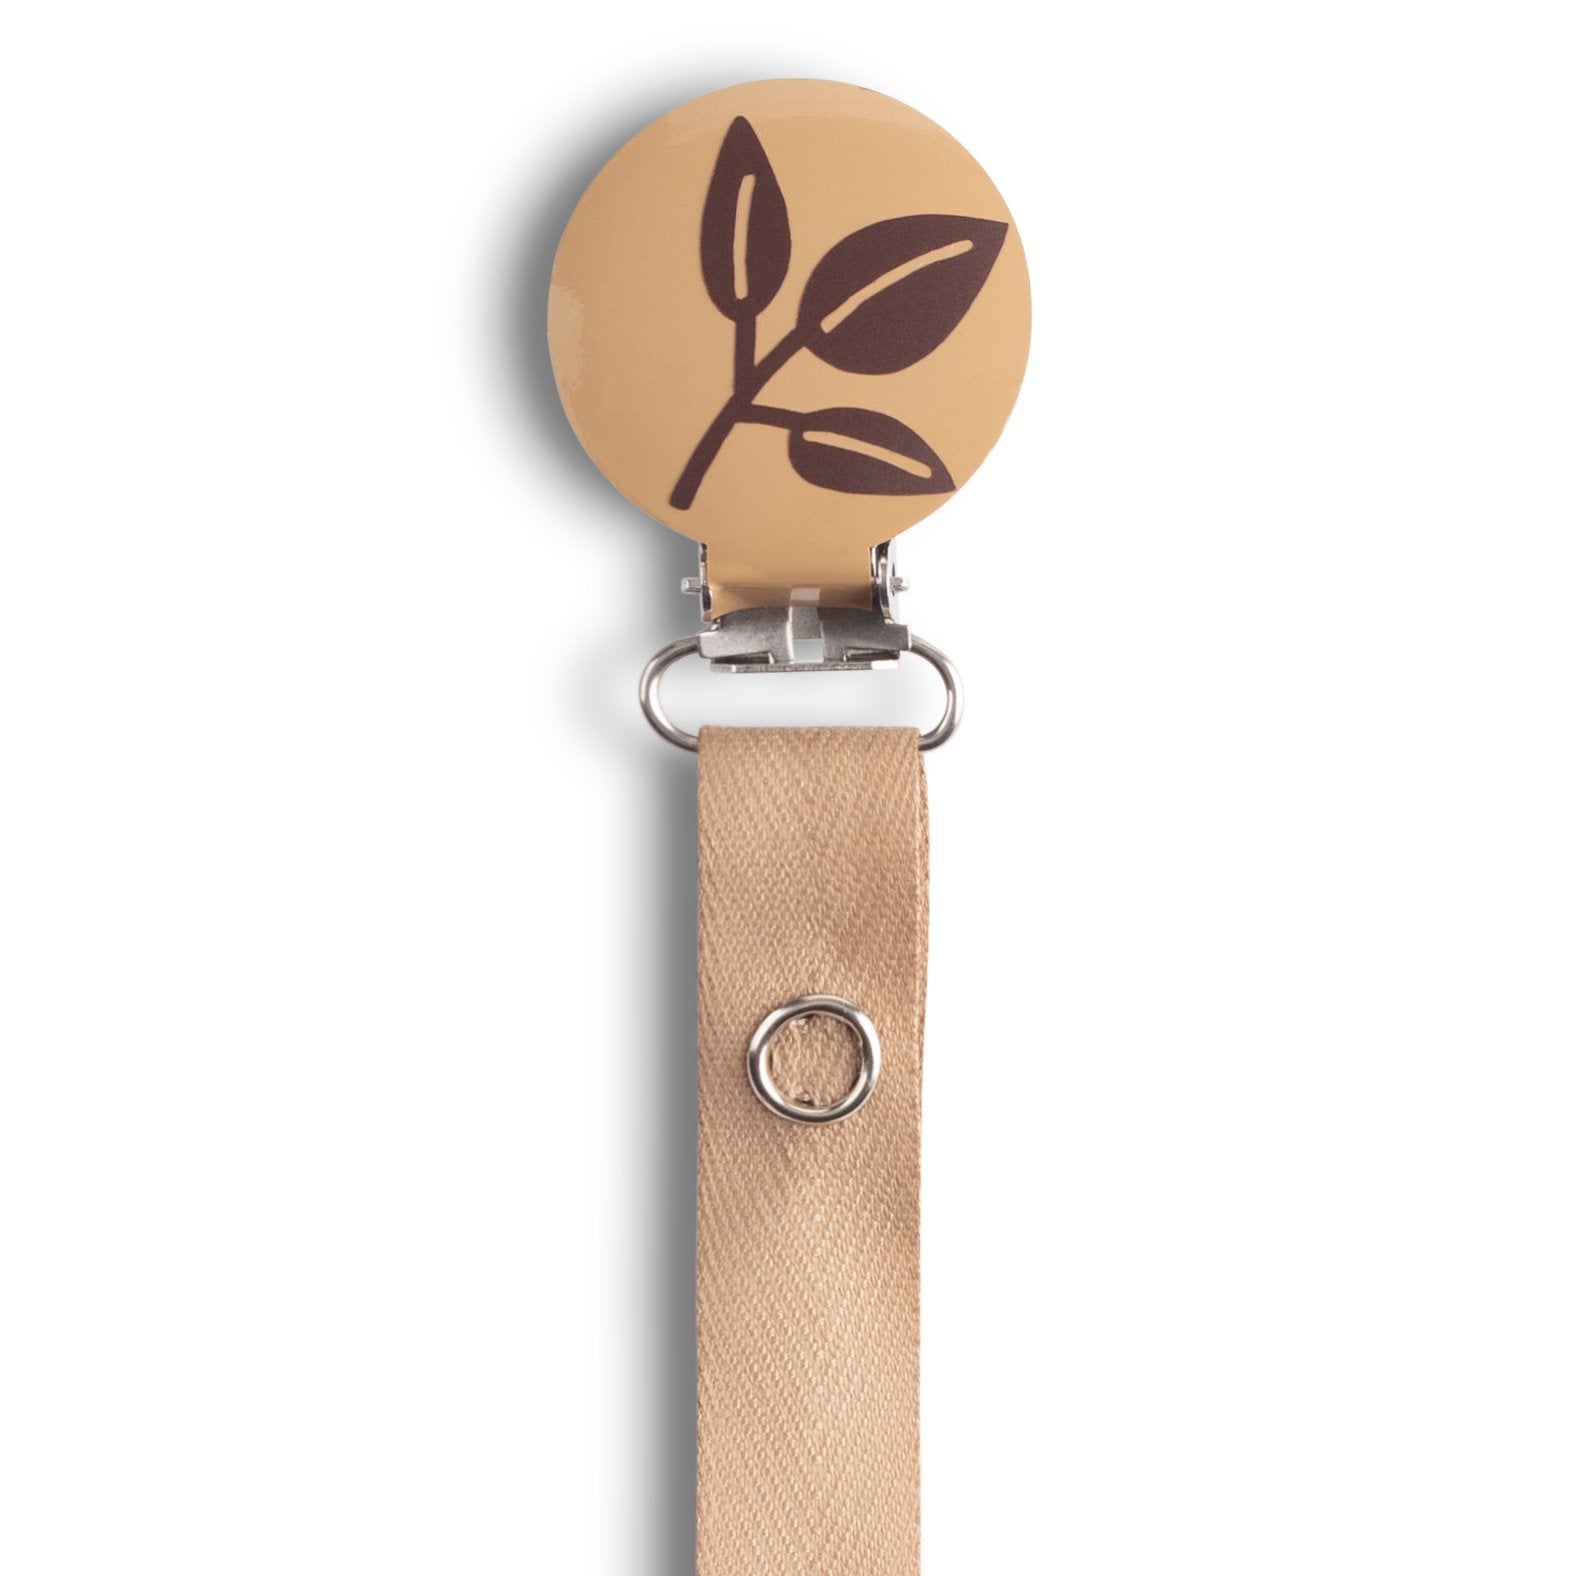 Classy Paci Tan with Brown Leaf pacifier clip GIFT SET FW21-22